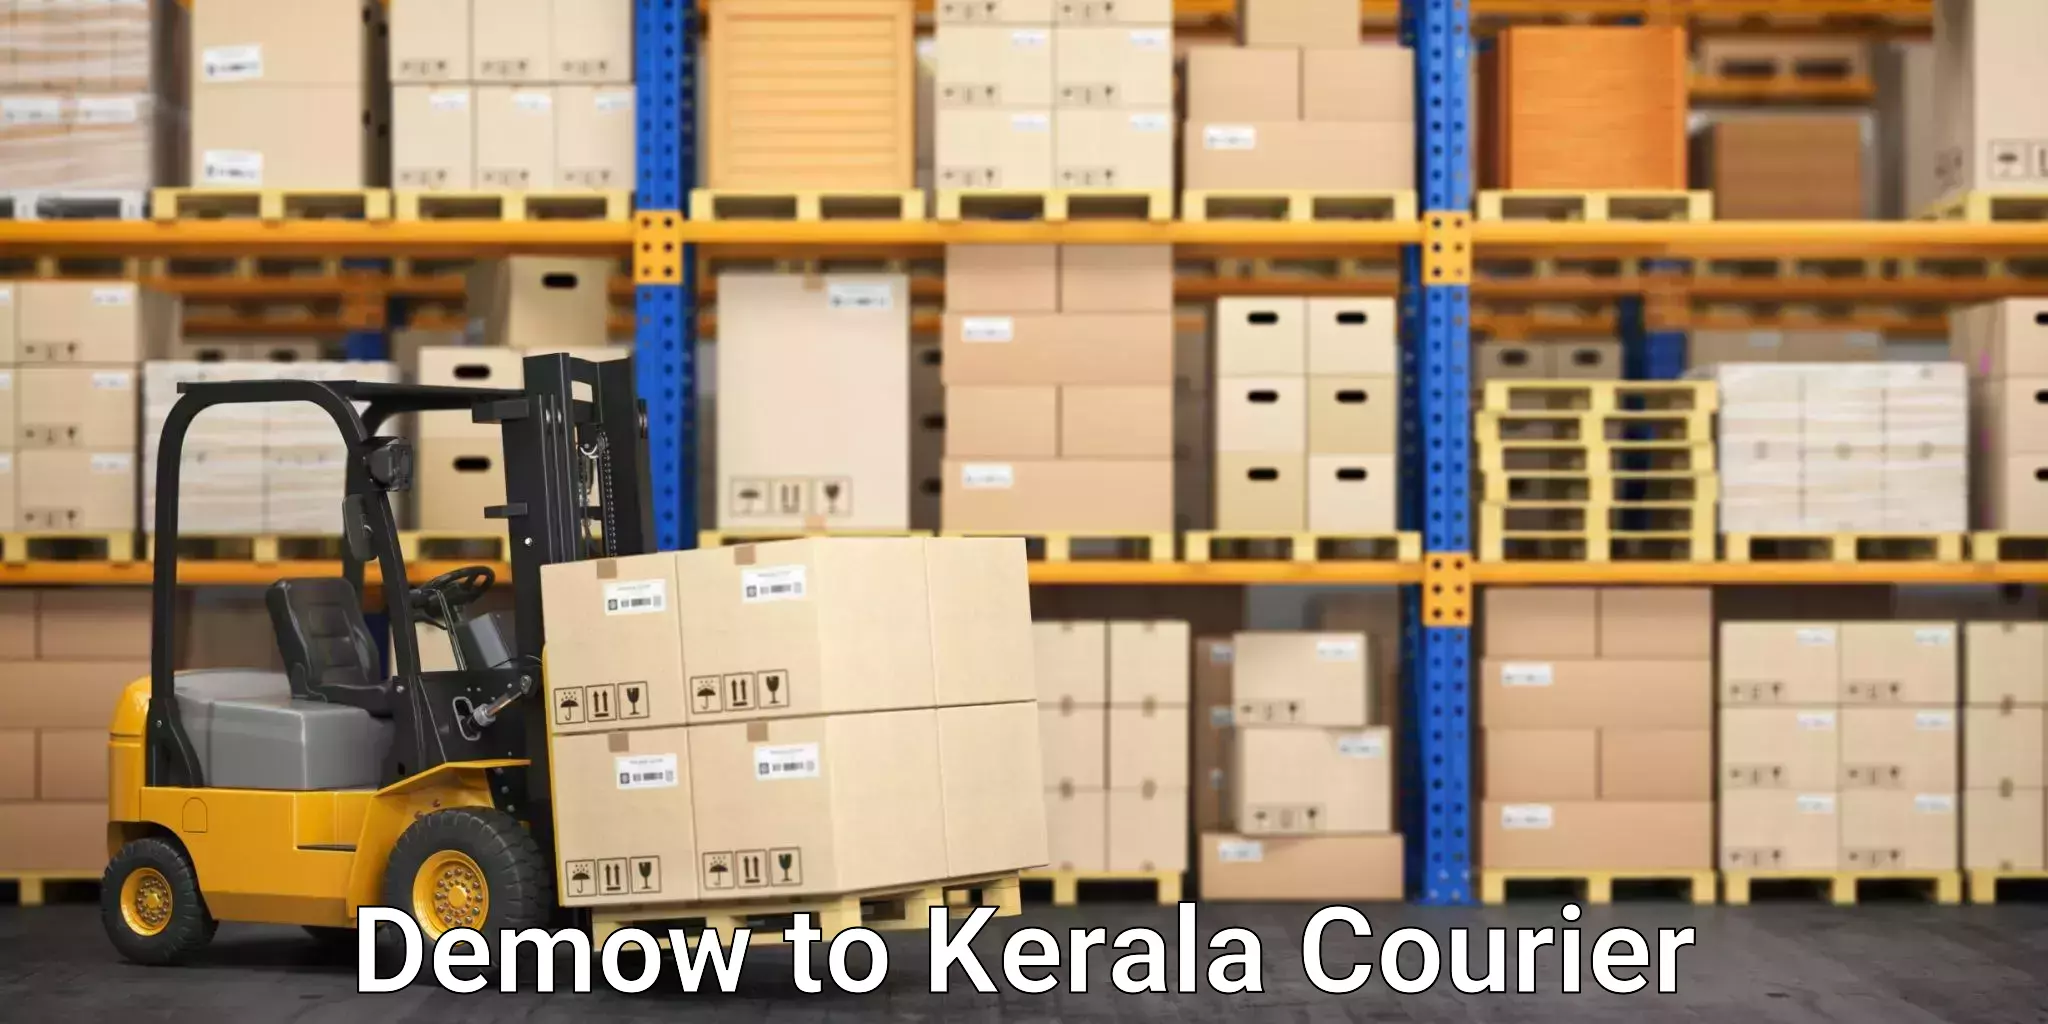 24-hour delivery options Demow to Kerala